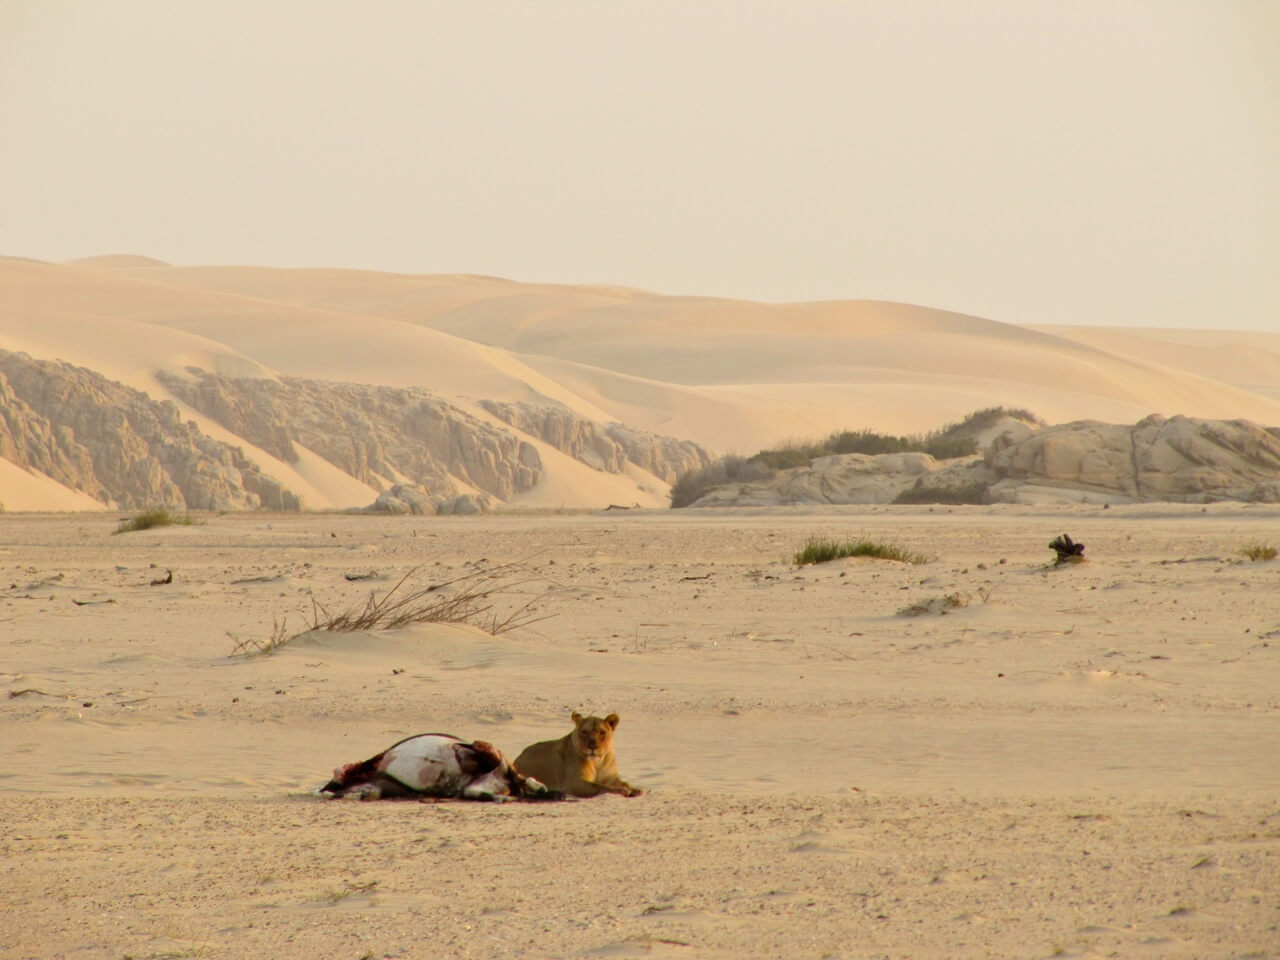 In the Hoarusib river bed we found a lioness on an oryx kill with the Atlantic ocean beyond the distant sand dunes